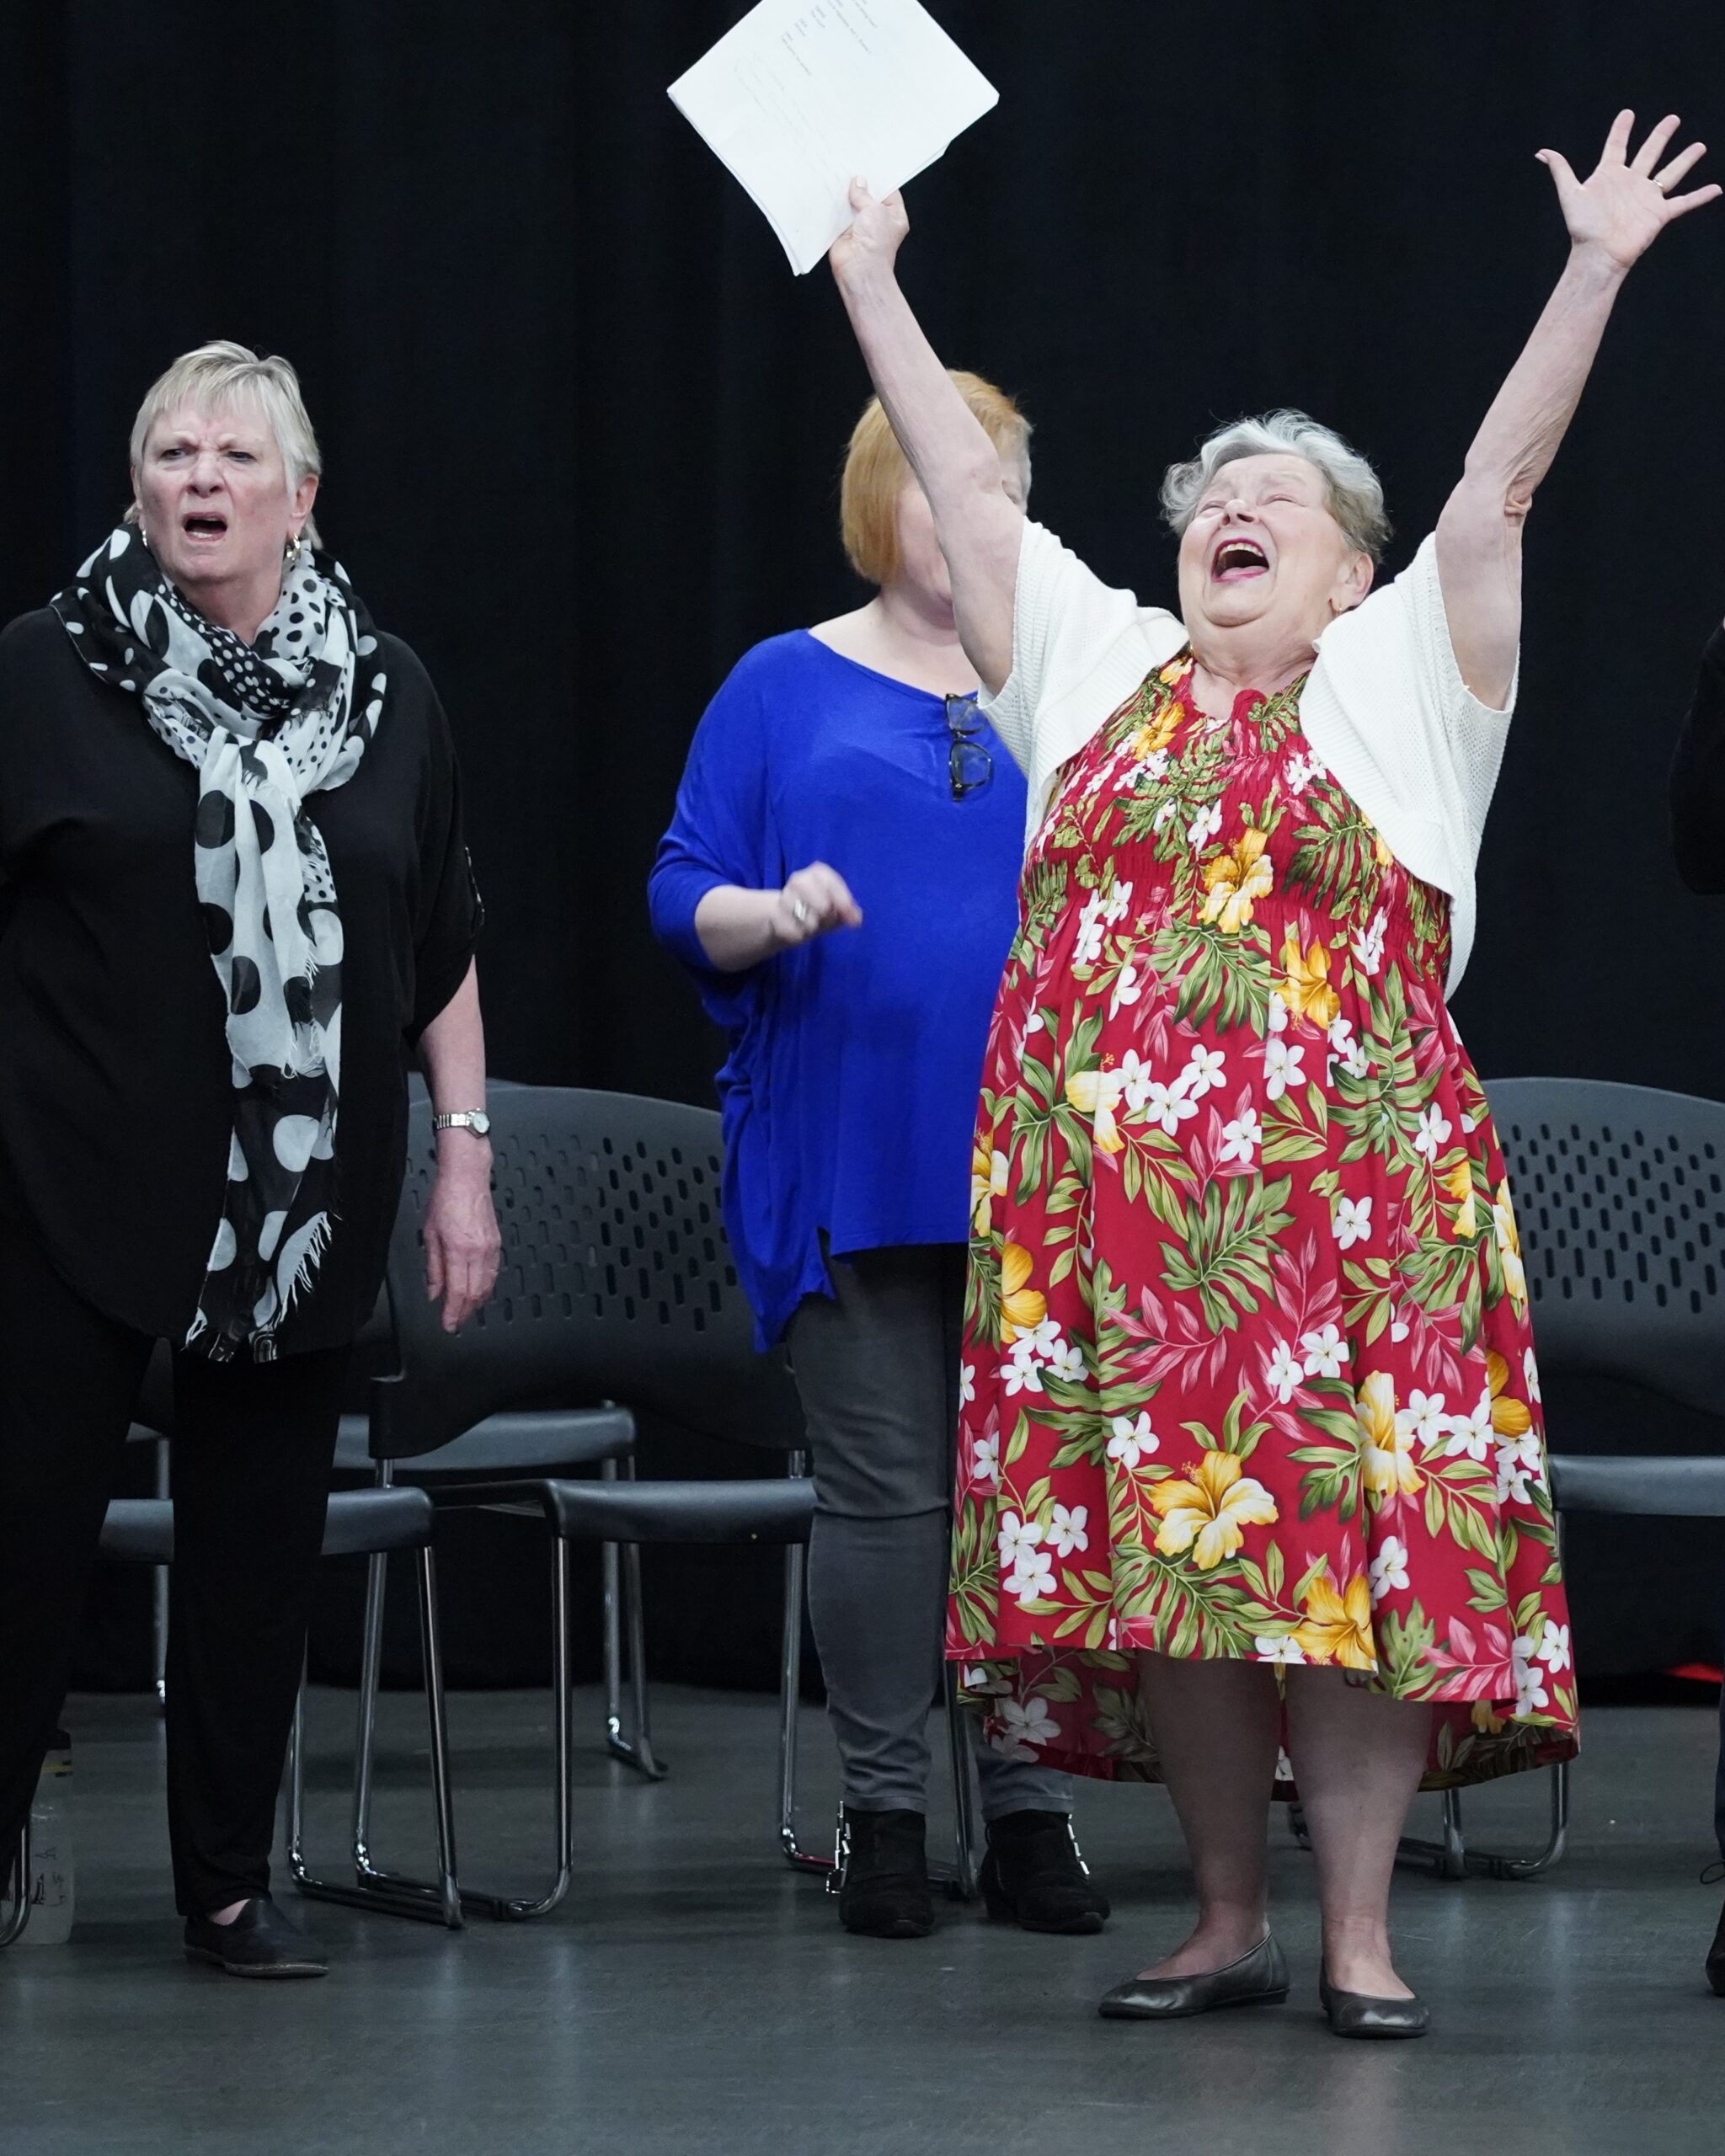 Bard for Life participants rehearsing. A woman on the left looks disgusted and a woman on the right looks elated with her hands raised in the air